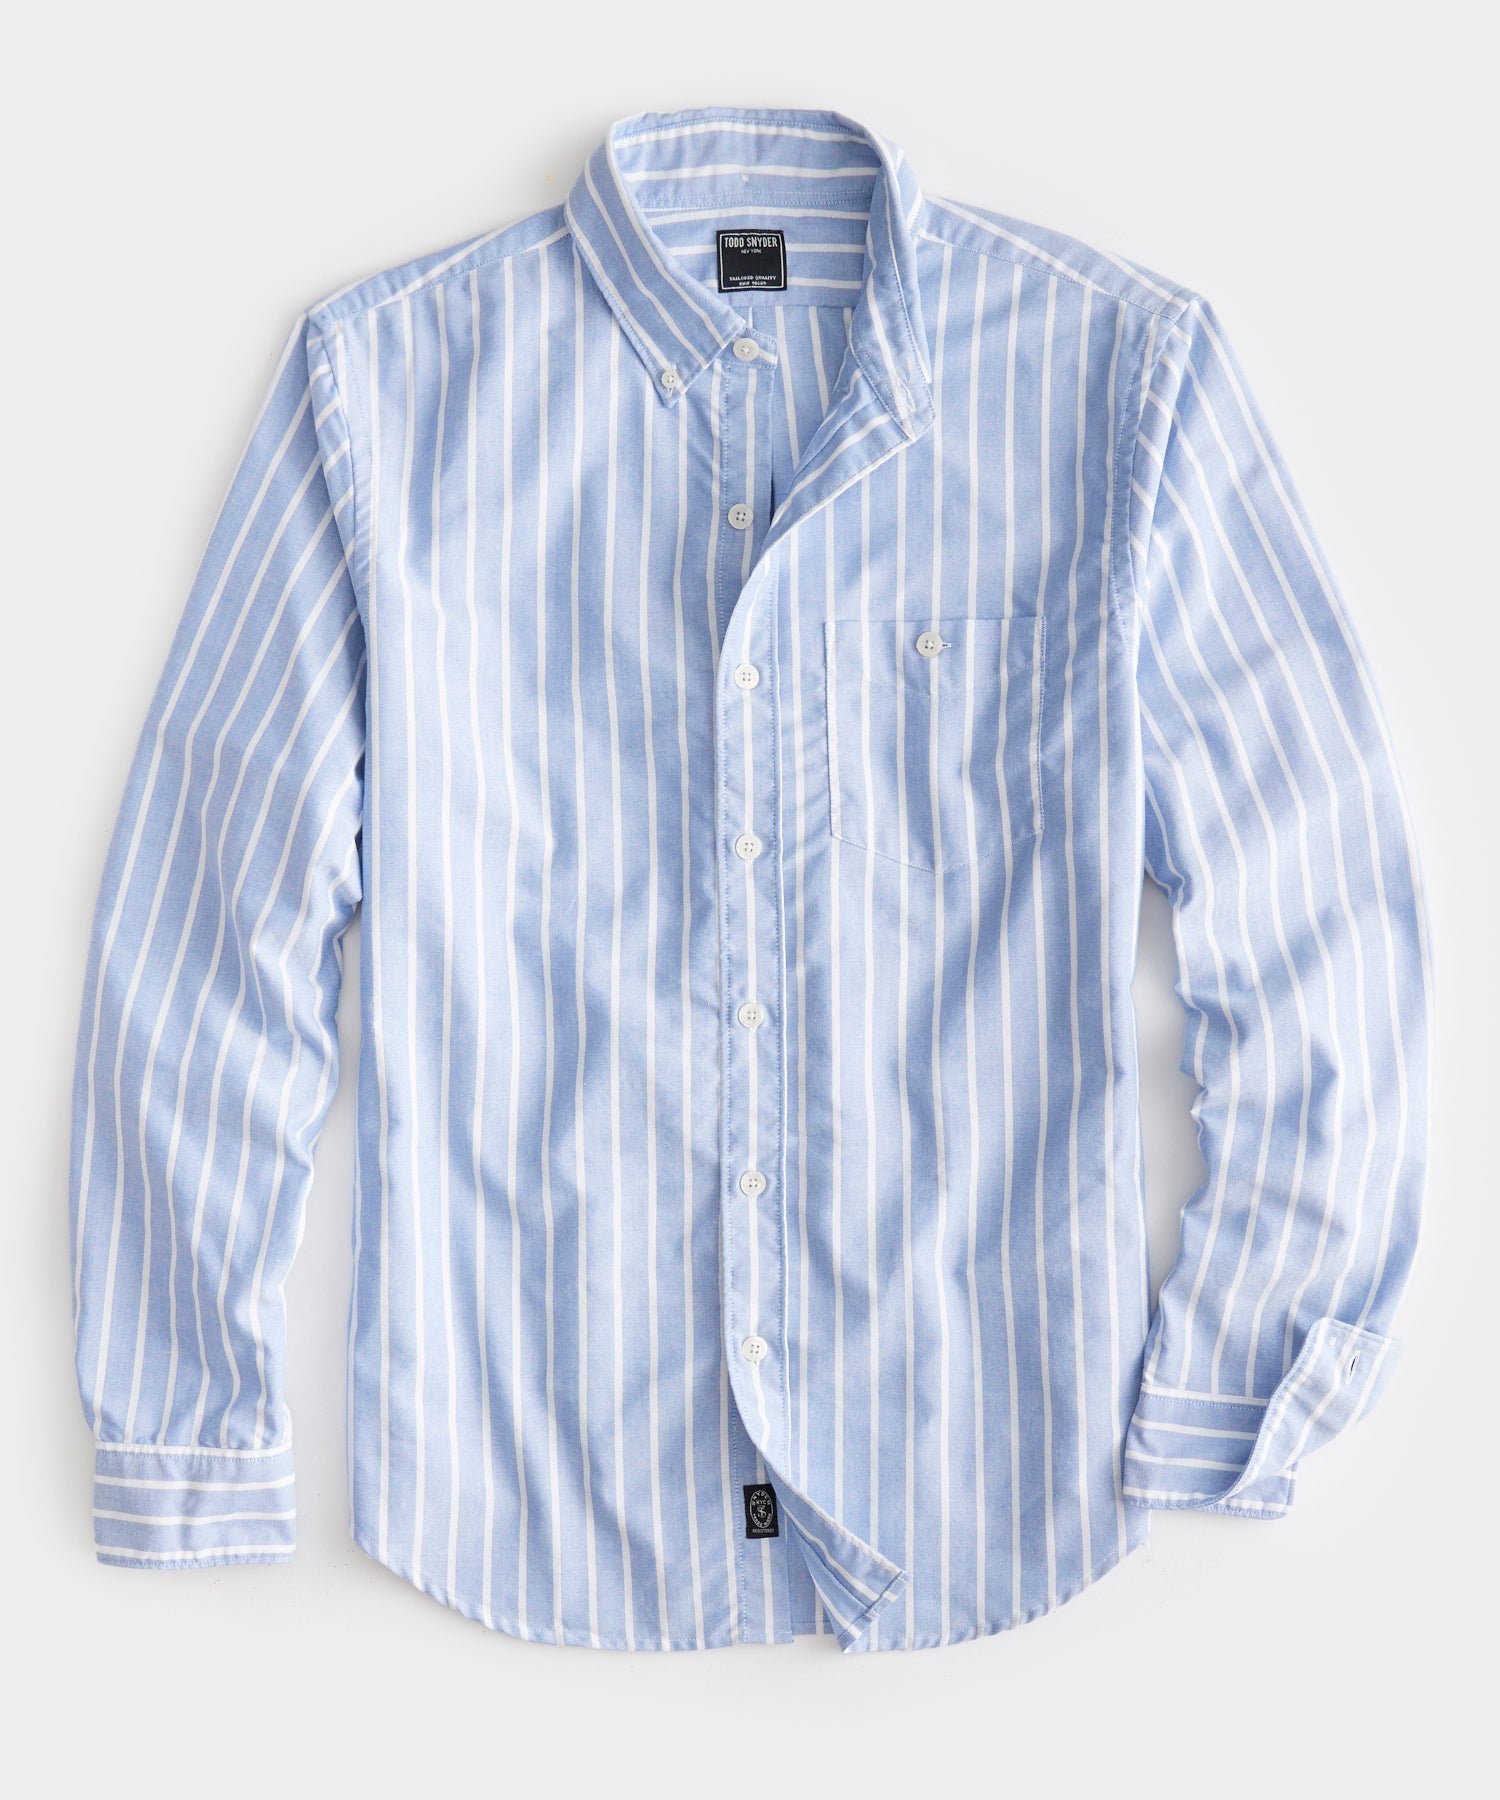 Classic Fit Favorite Oxford Long-Sleeve Shirt in Blue Wide Stripe